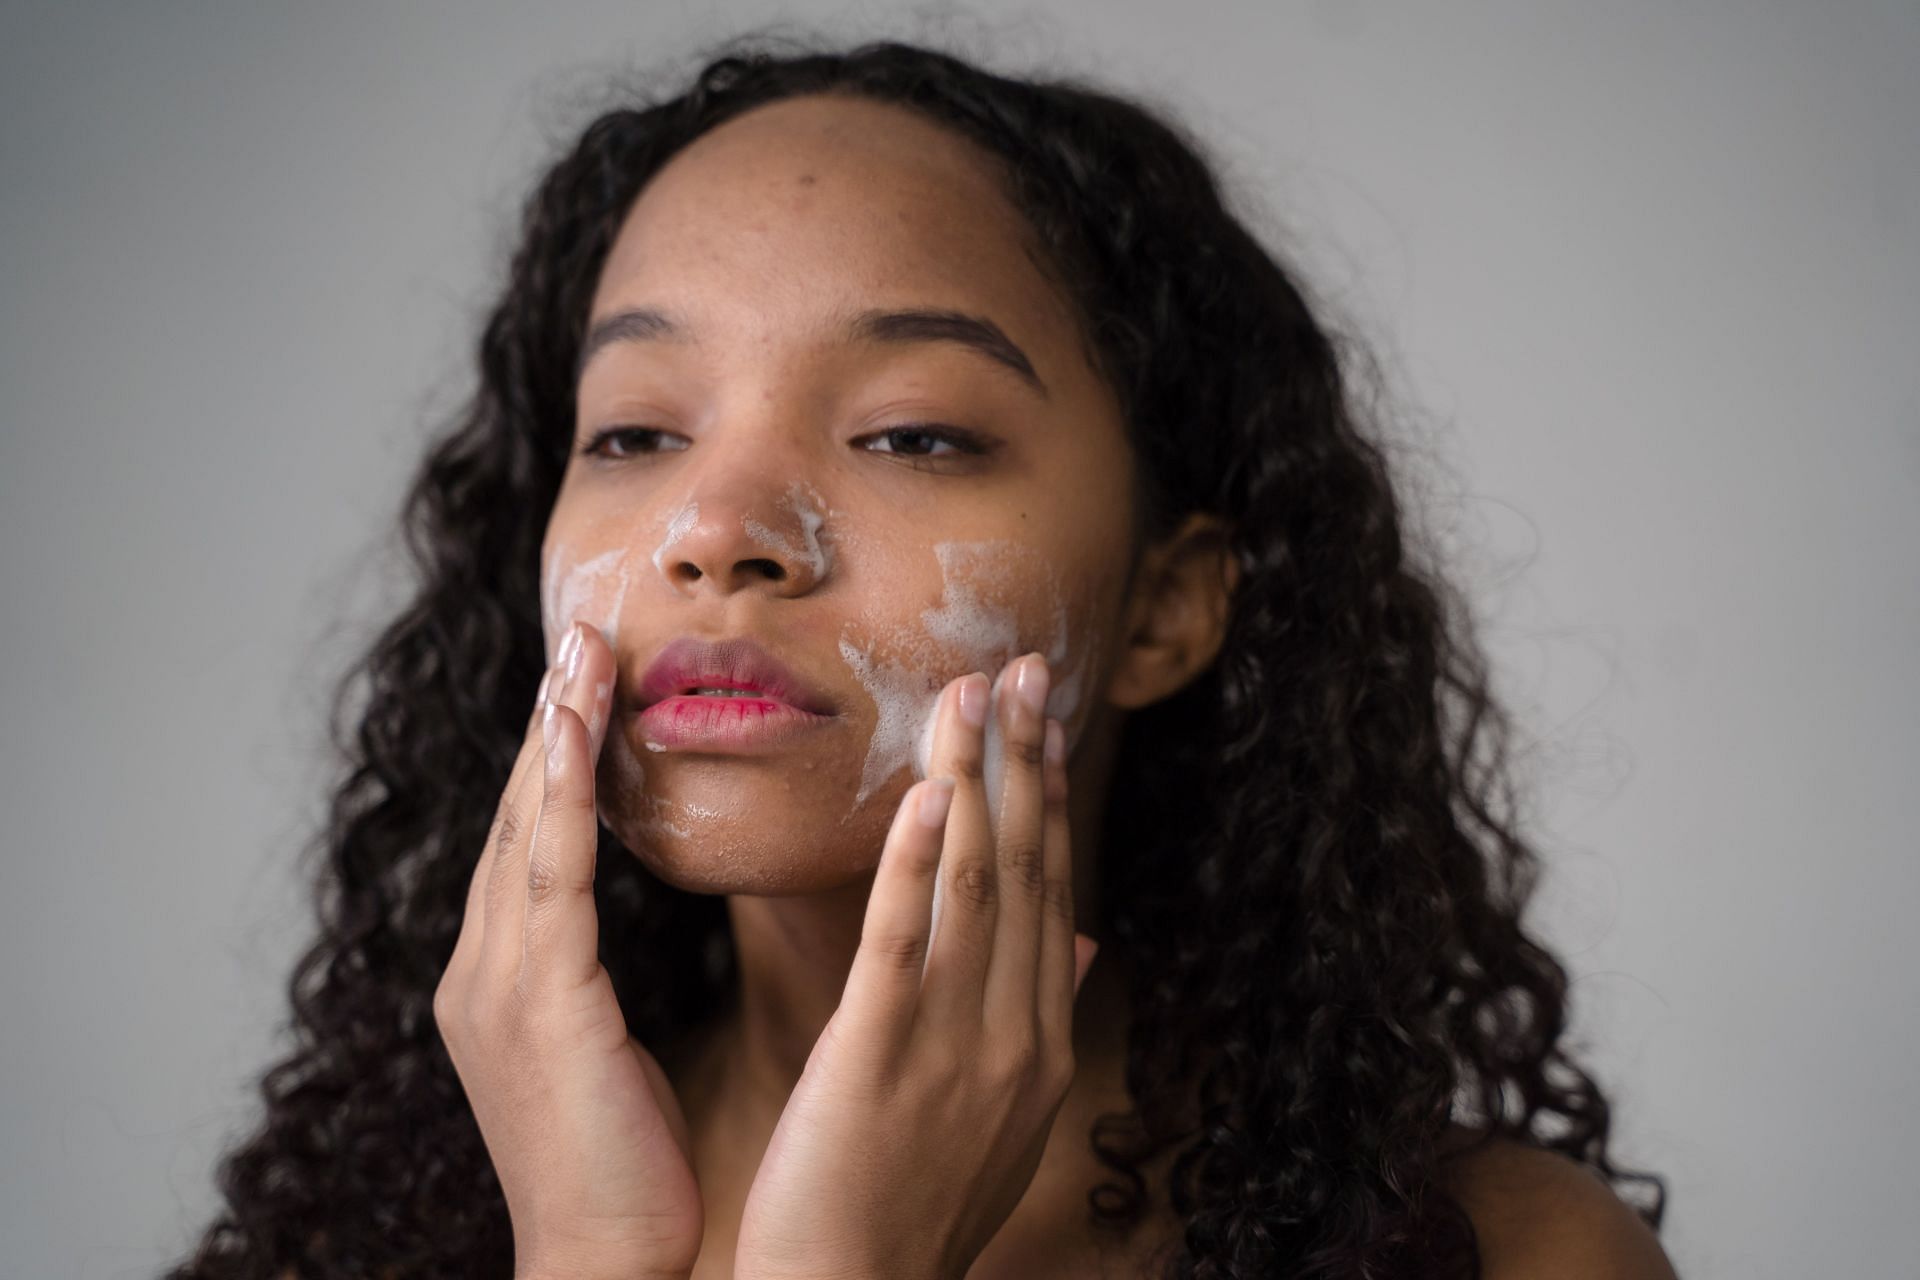 Homemade face scrub is a great way to care for your skin (Image via Pexels/Ron Lach)